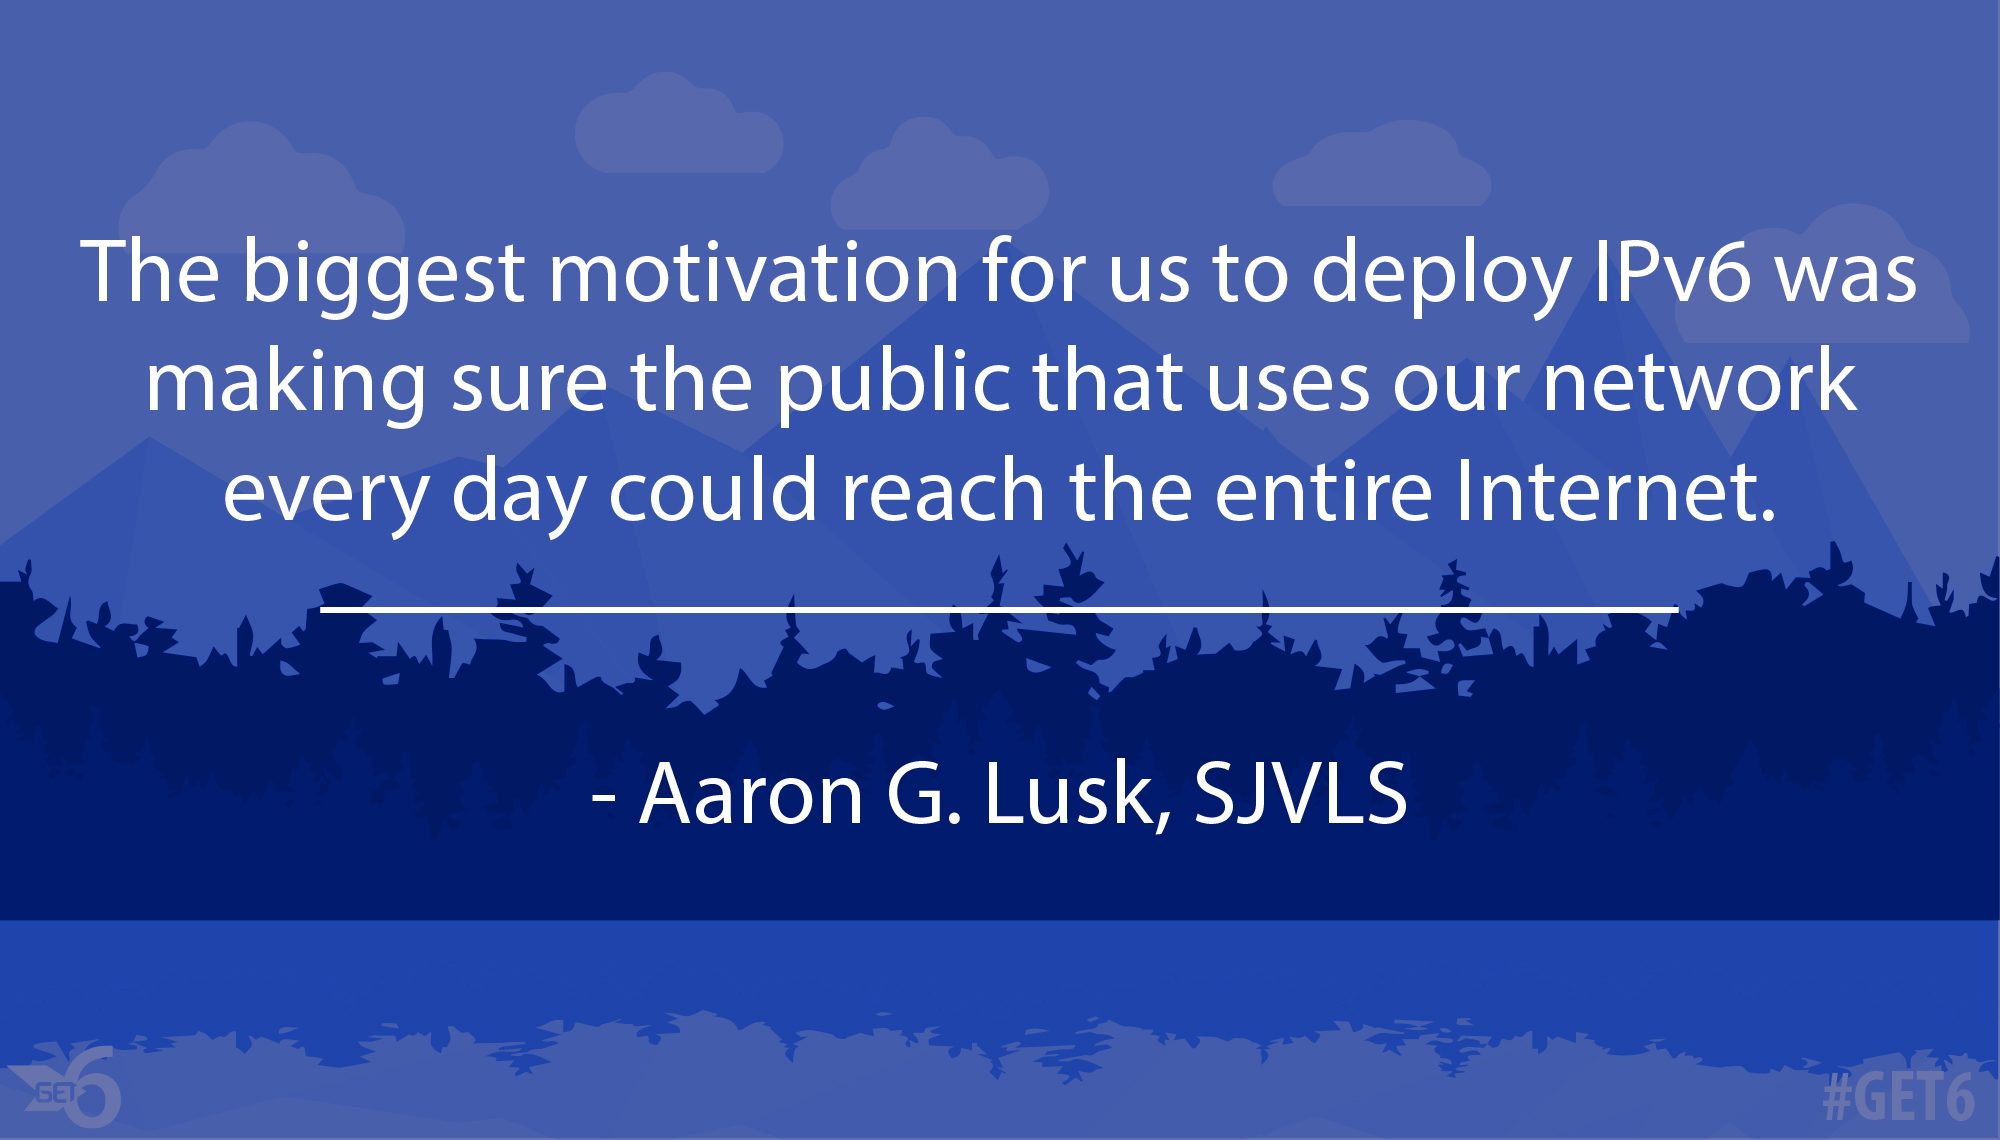 “The biggest motivation for us to deploy IPv6 was making sure the public that uses our network everyday could reach the entire Internet.”